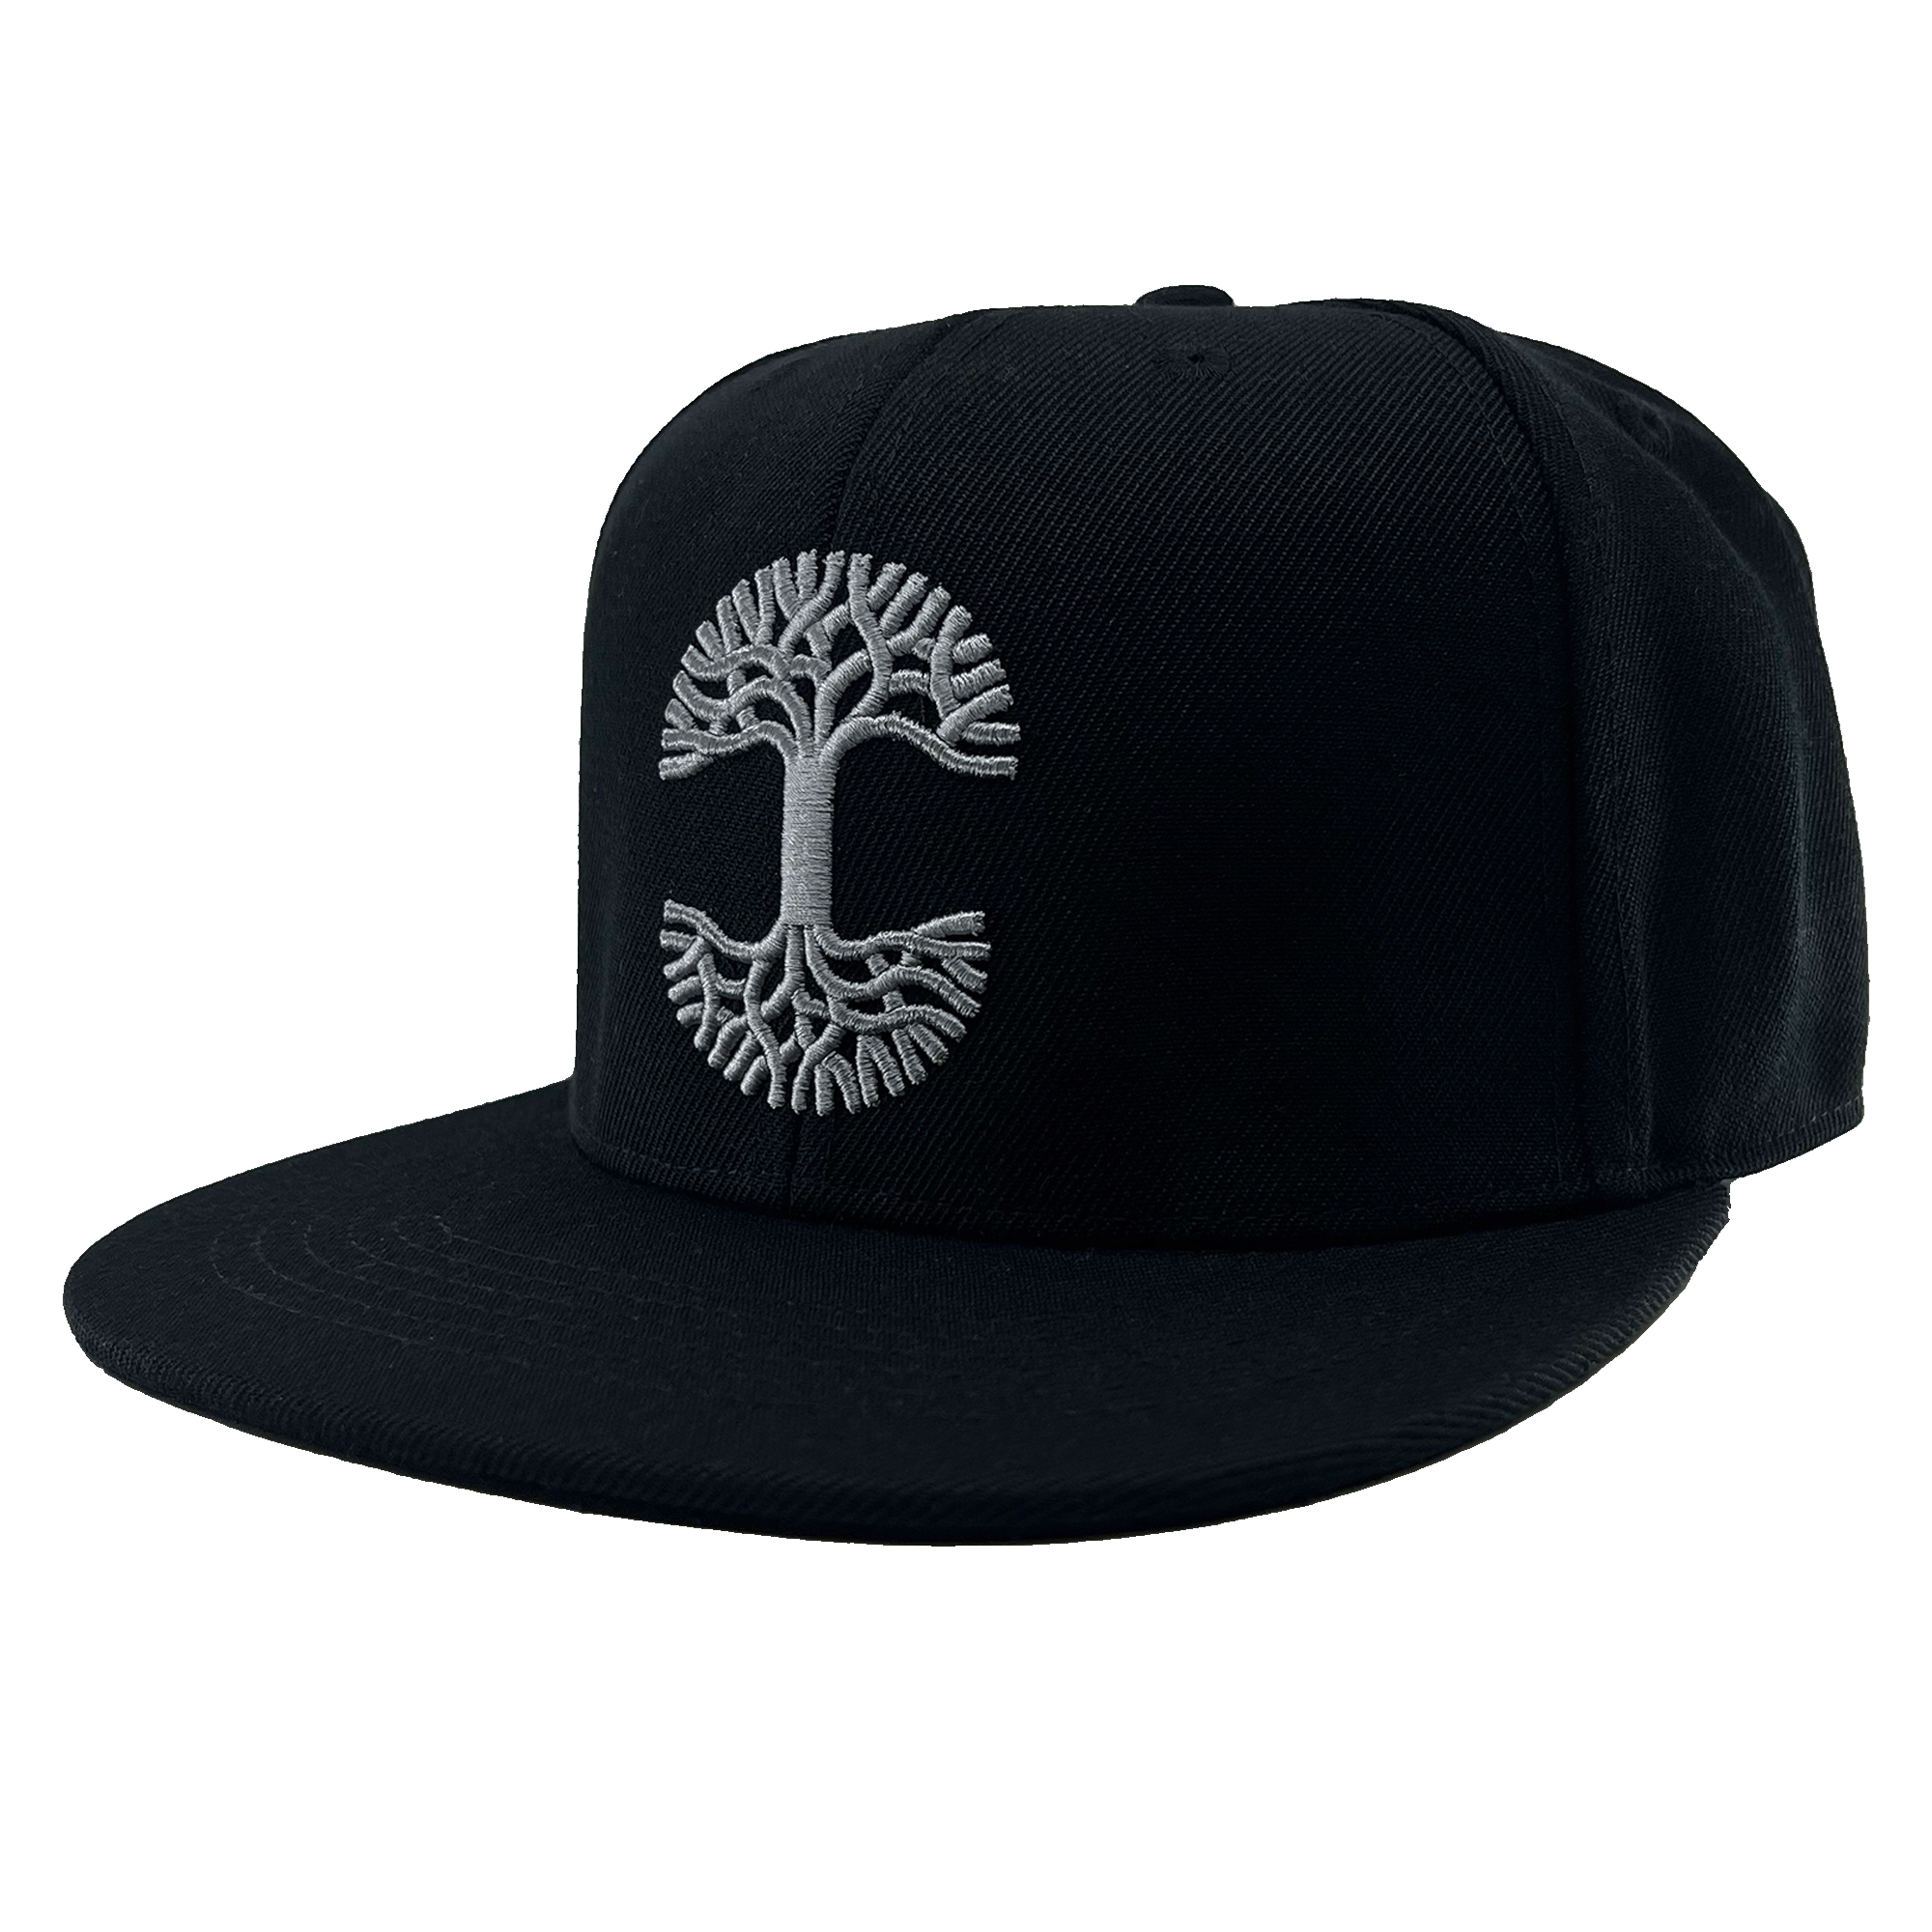 Side view of black snapback hat with grey embroidered Oaklandish tree logo on the crown and flat square bill.